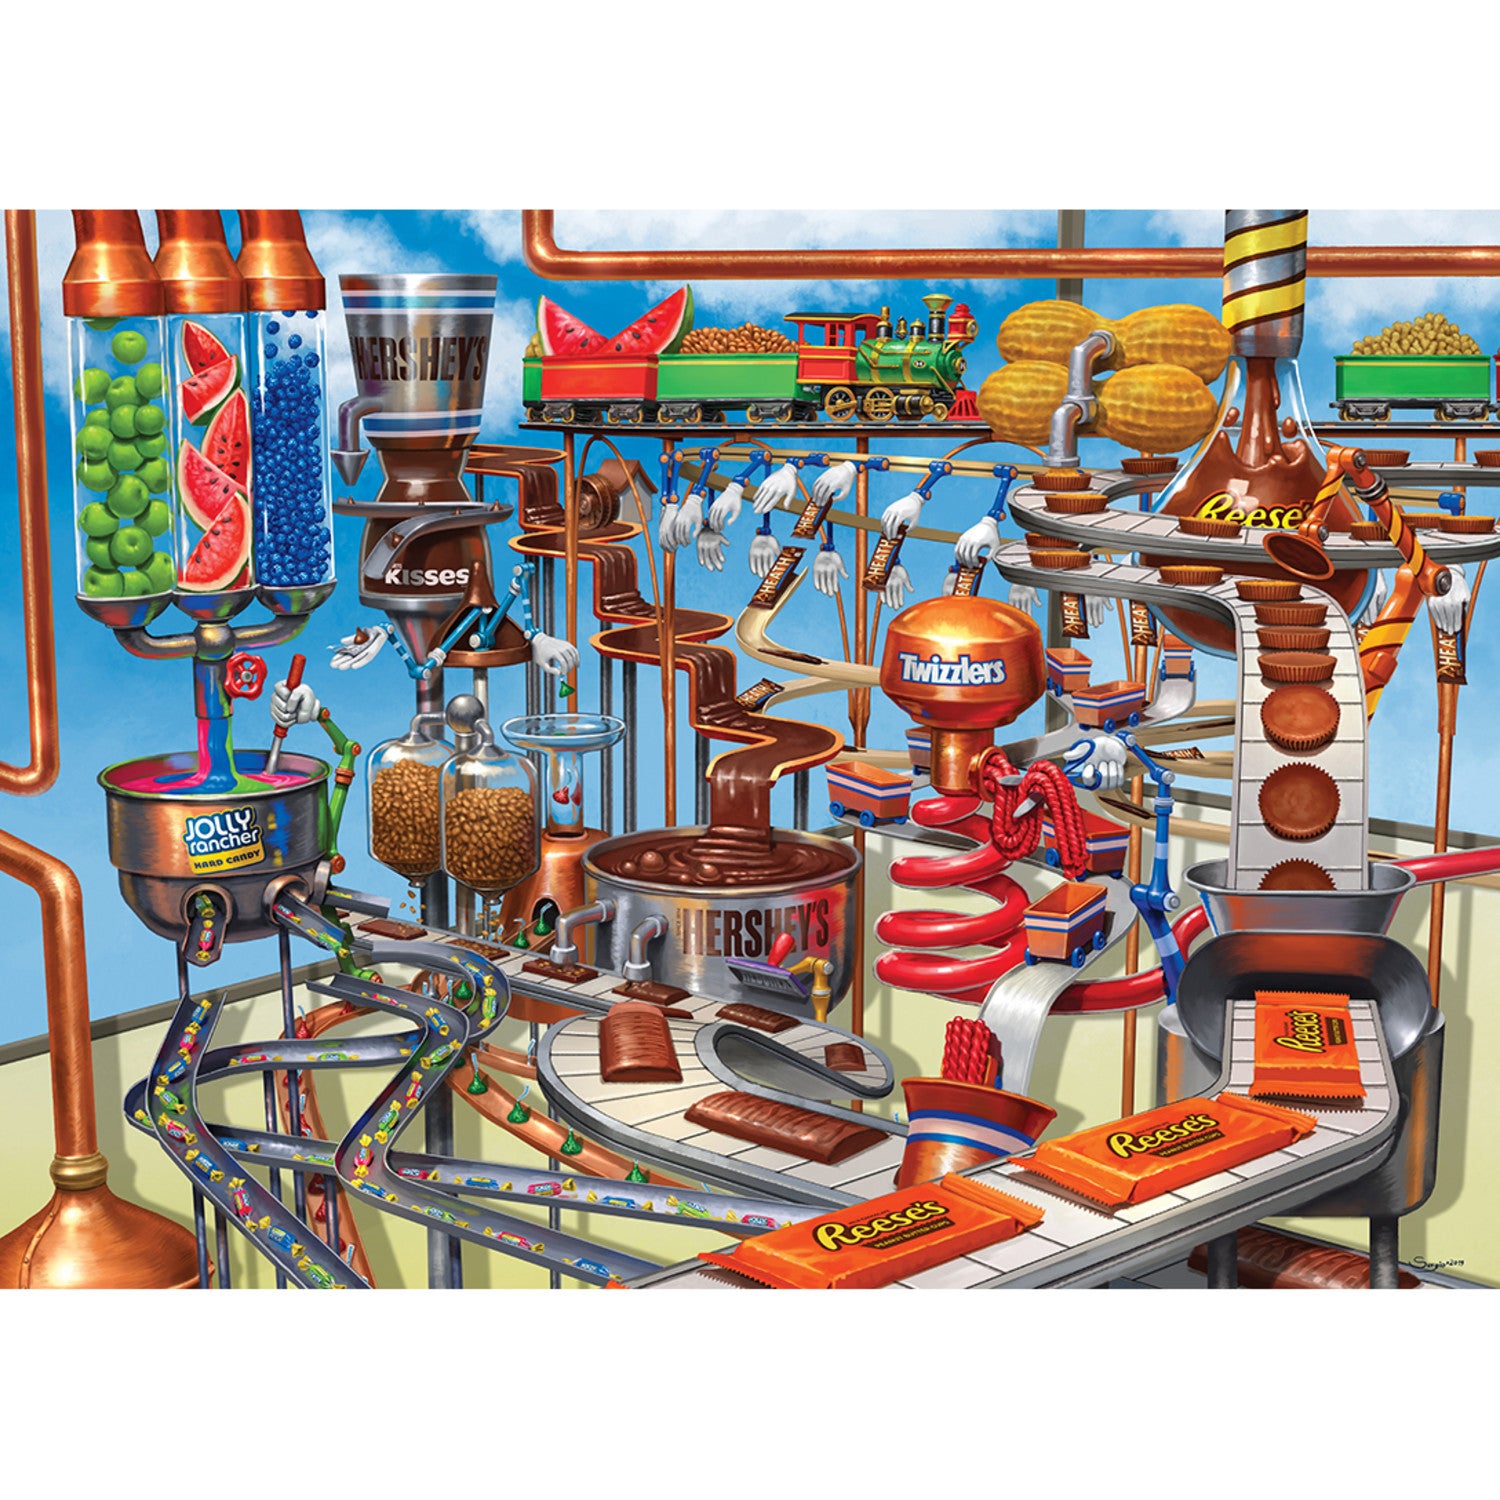 Hershey's - Chocolate Factory 1000 Piece Puzzle